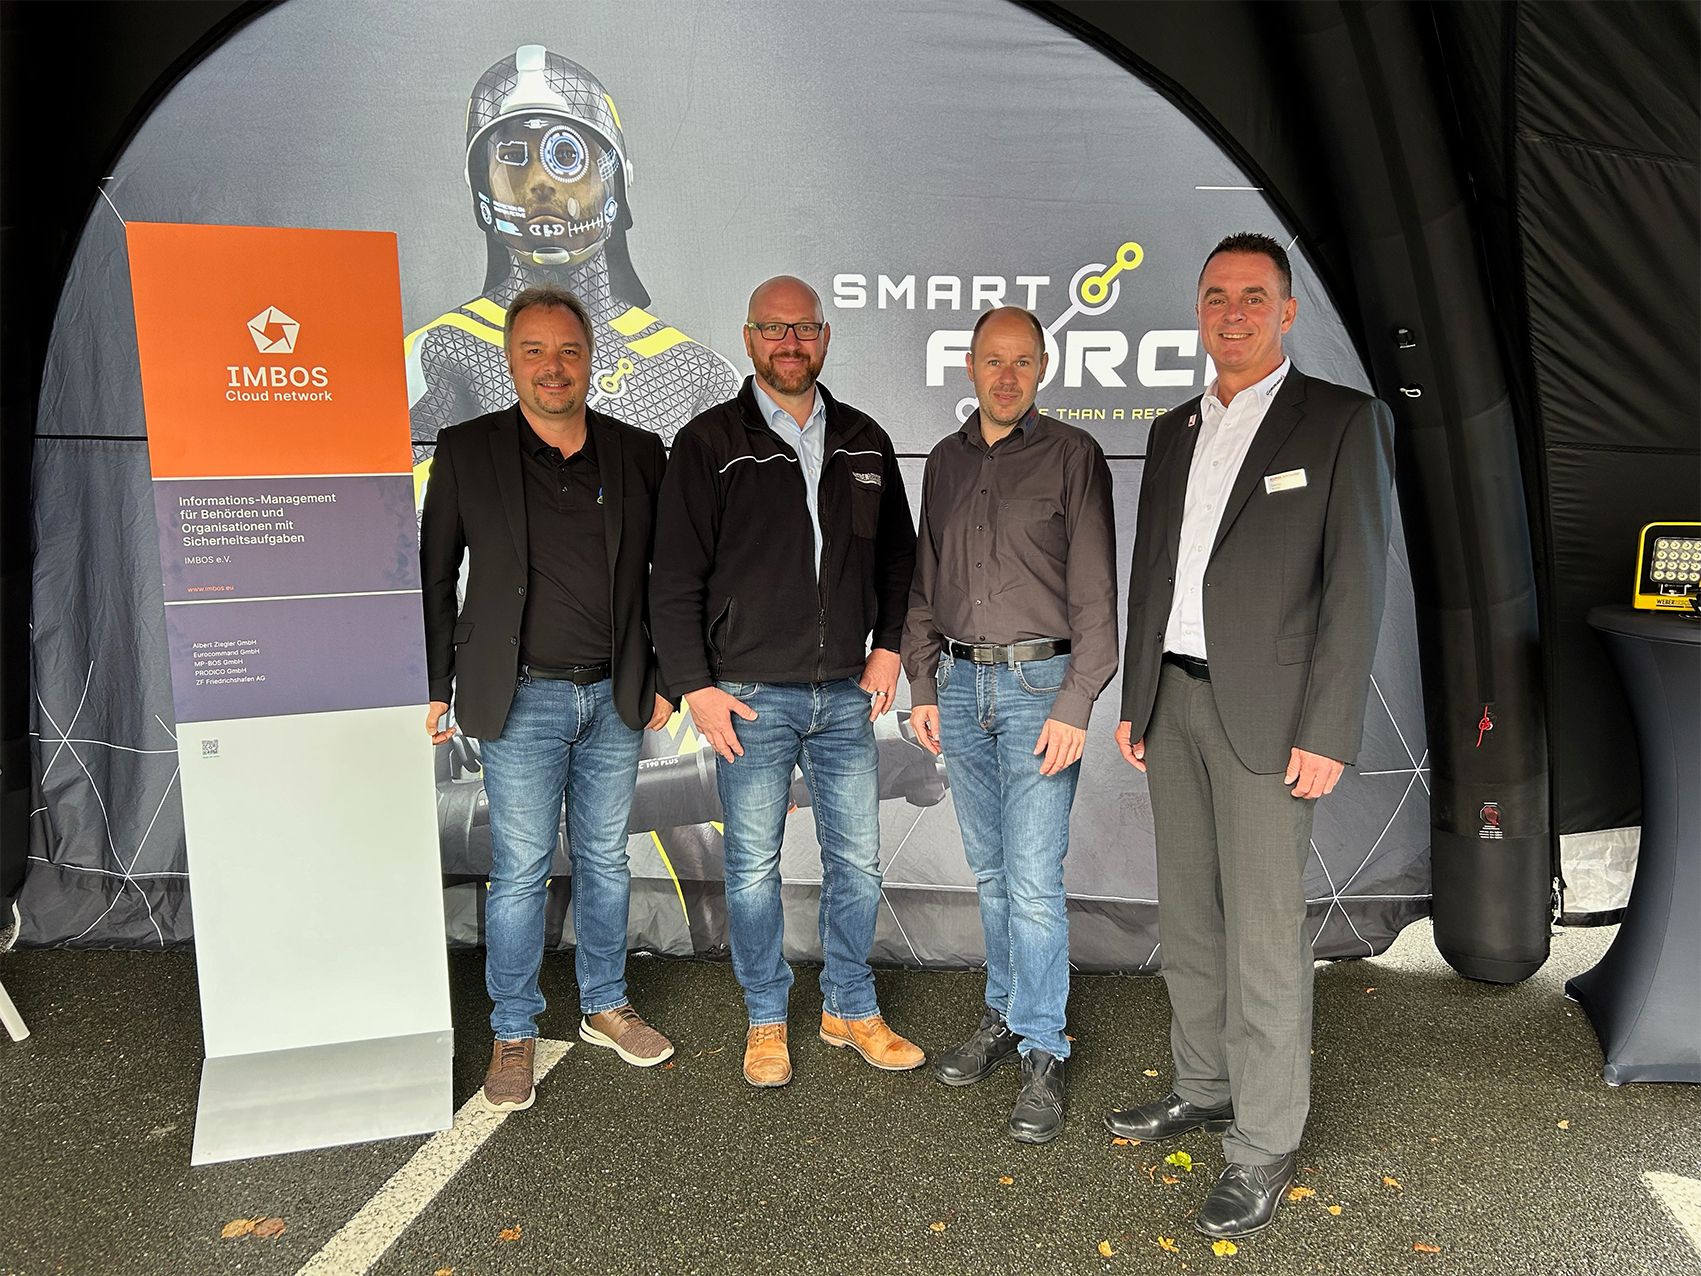 WEBER RESCUE SYSTEMS GmbH als neues Mitglied bei IMBOS e.V.